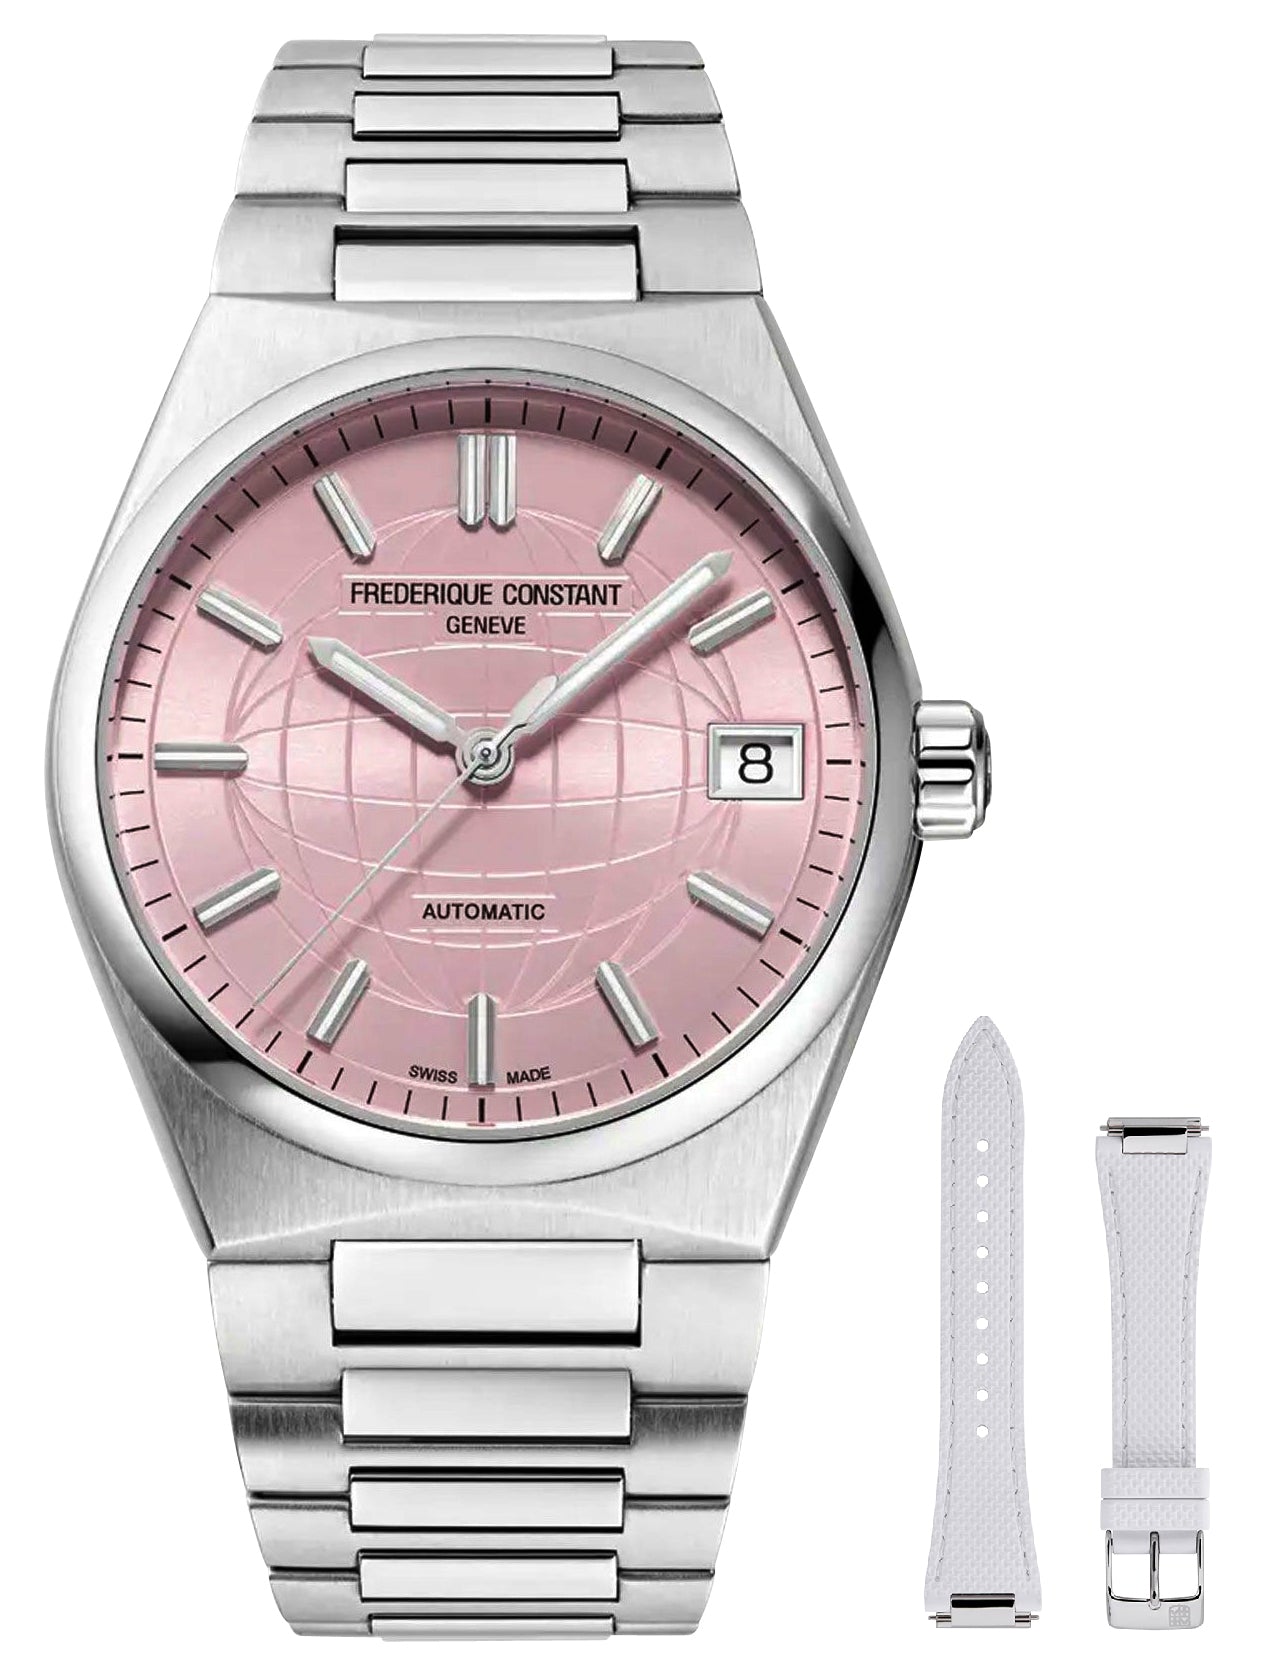 Frederique Constant Highlife Automatic Stainless Steel Pink Dial Interchangeable White Rubber Strap Date Womens Watch FC-303LP2N